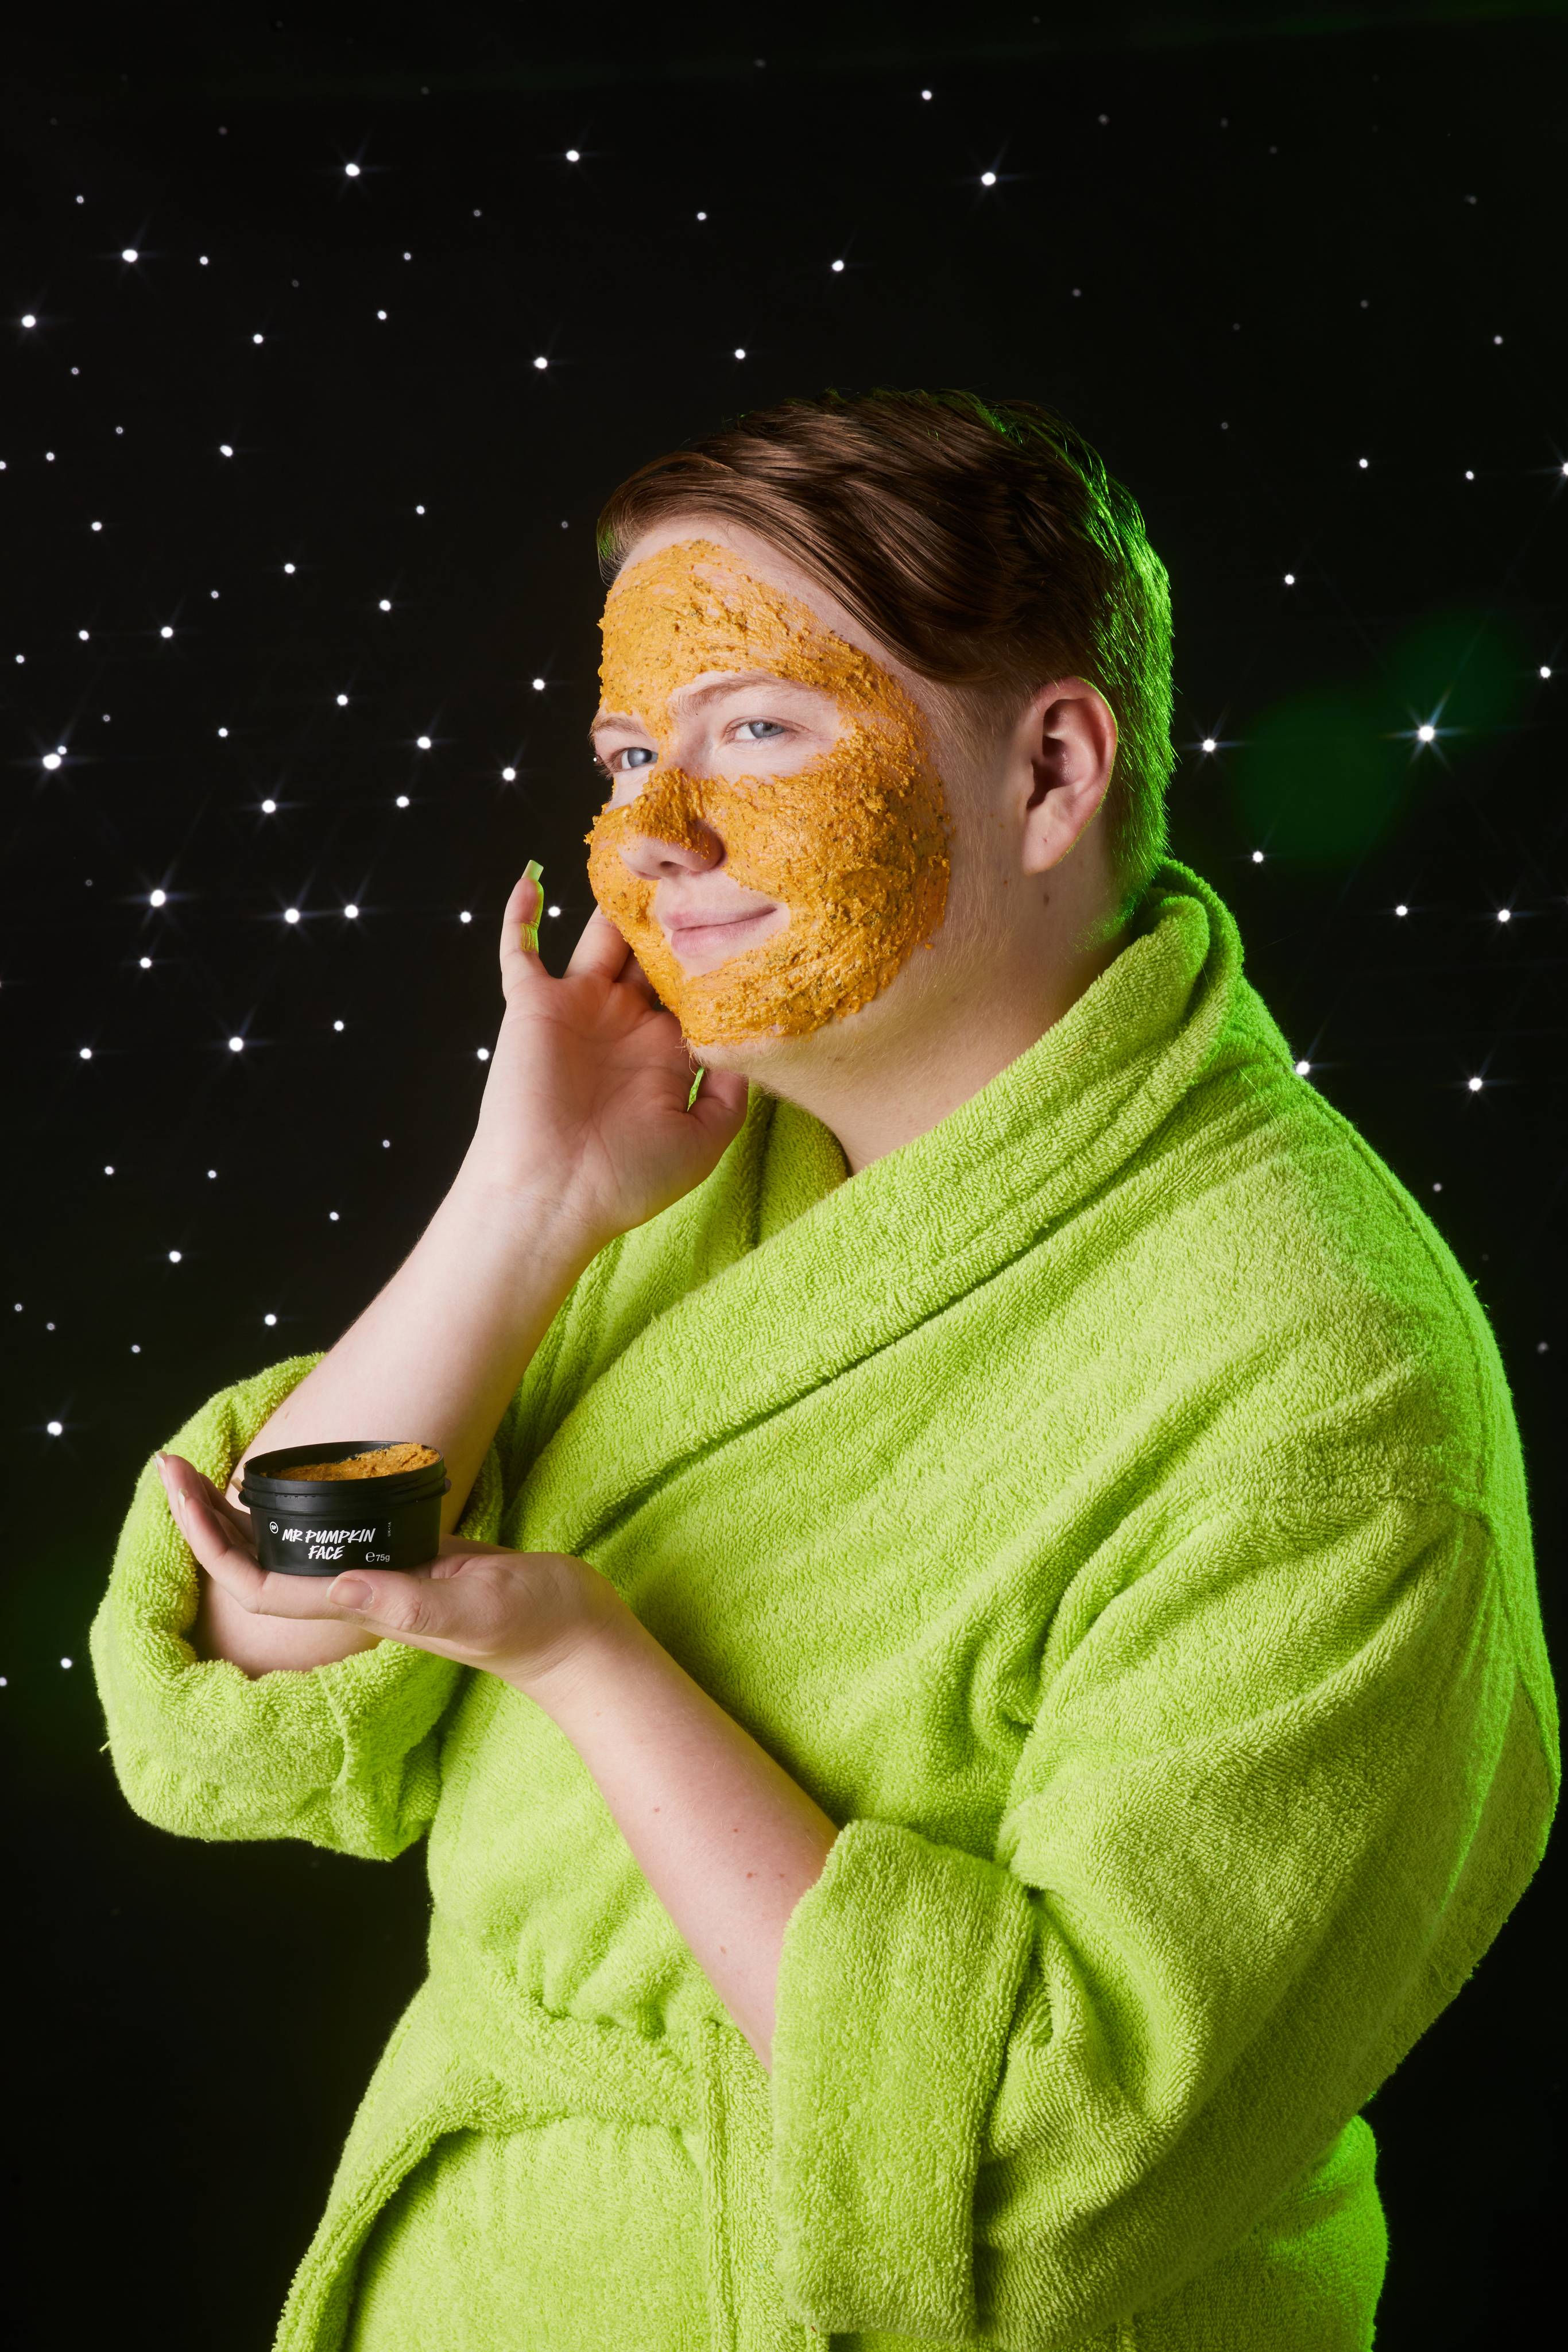 Image shows model in a neon-green robe as they gently spread the product over their face with their hand.